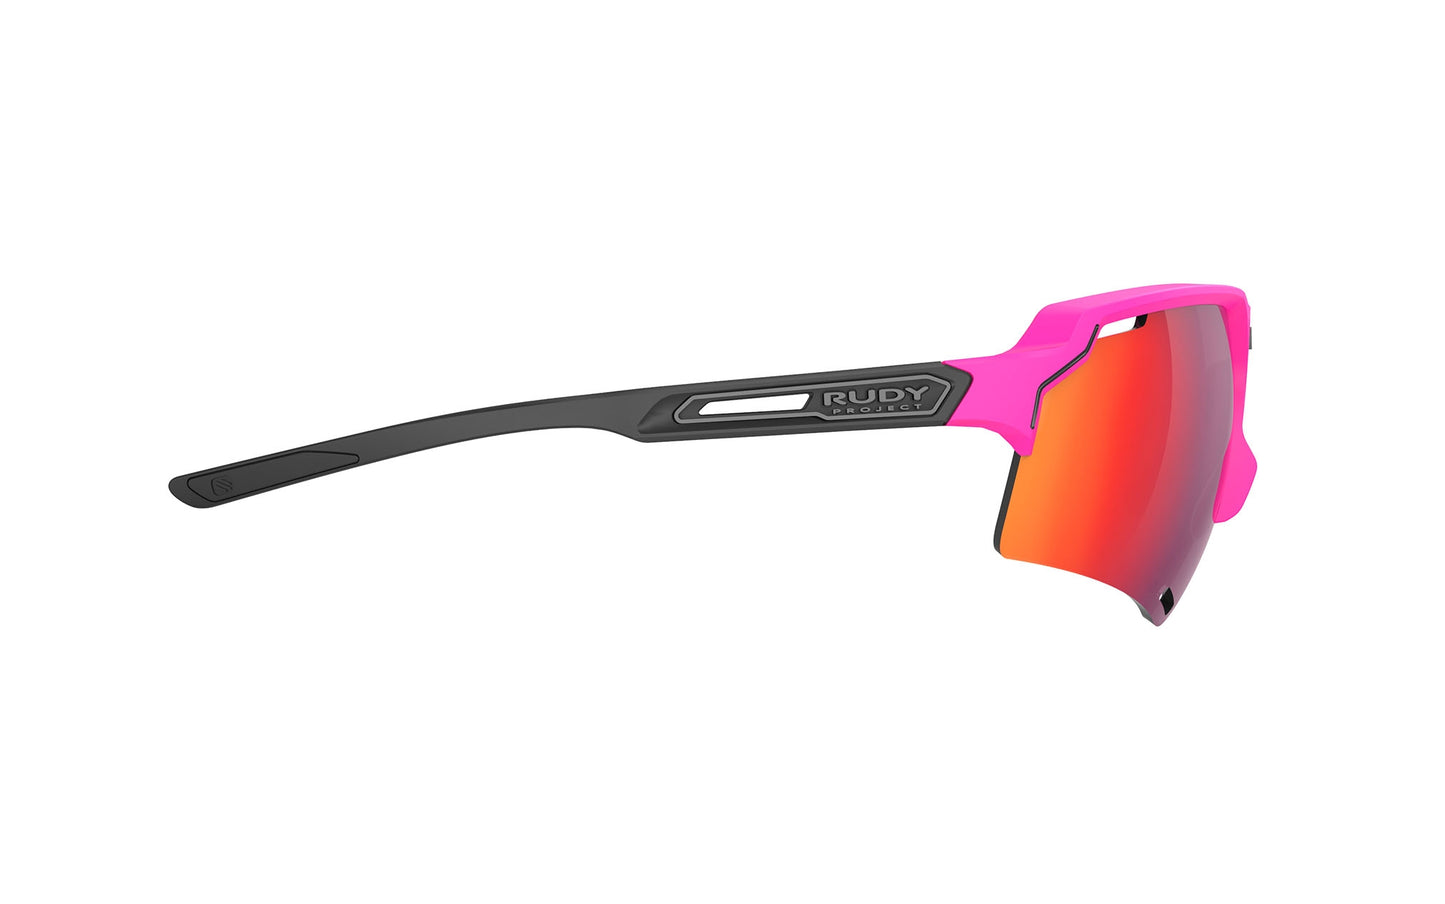 Rudy Project Deltabeat Pink Fluo/Black (Matte) - Rp Optics Multilaser Red Sunglasses